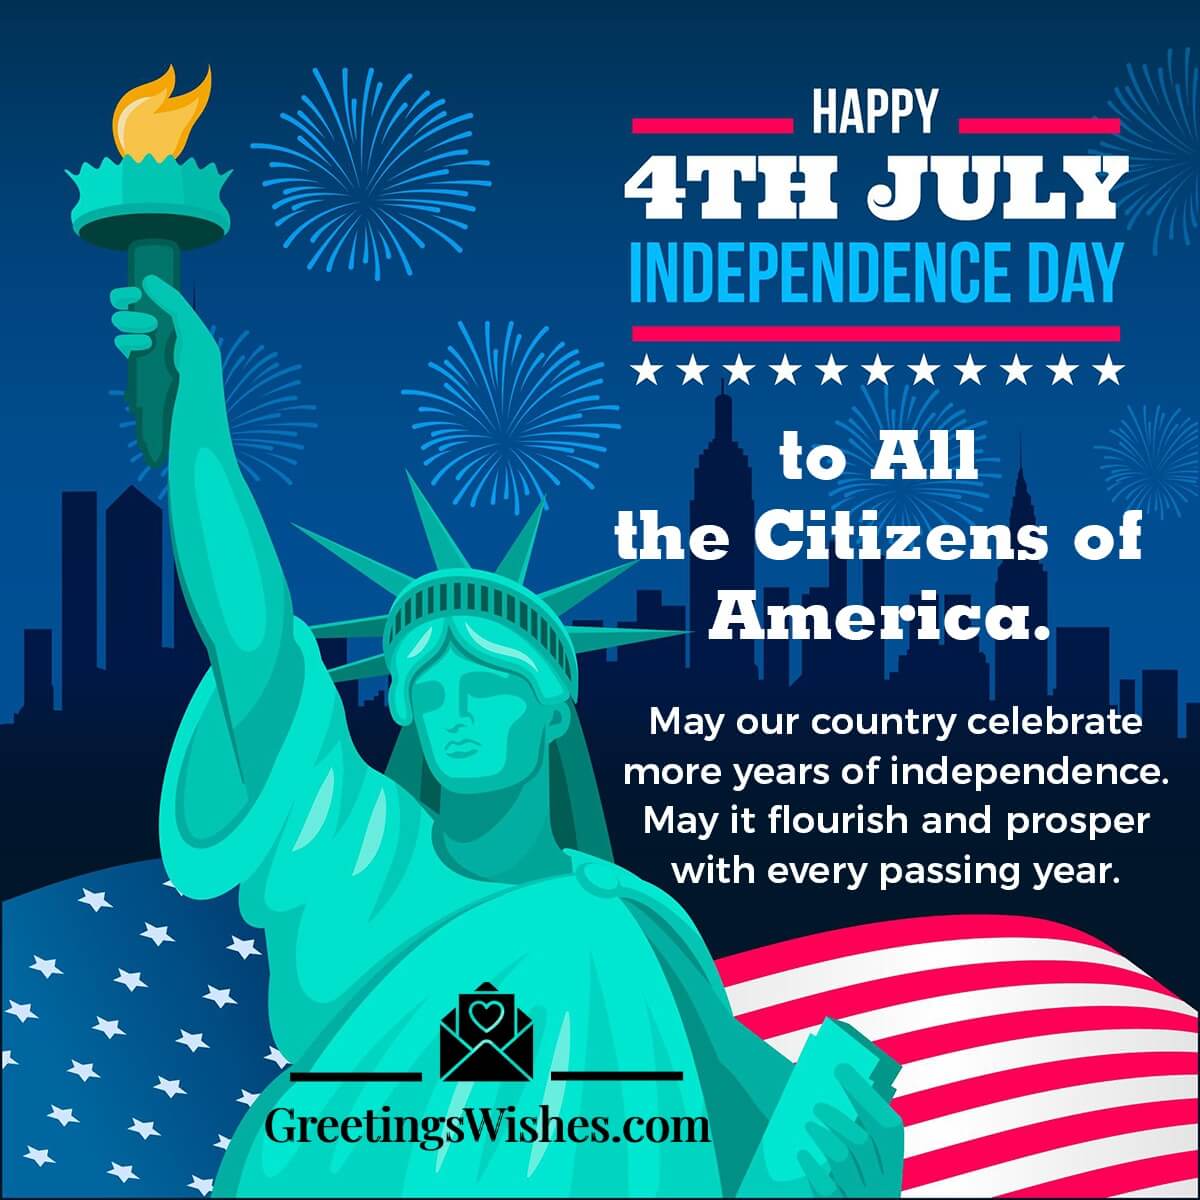 Happy 4th Of July Independence Day Status Image